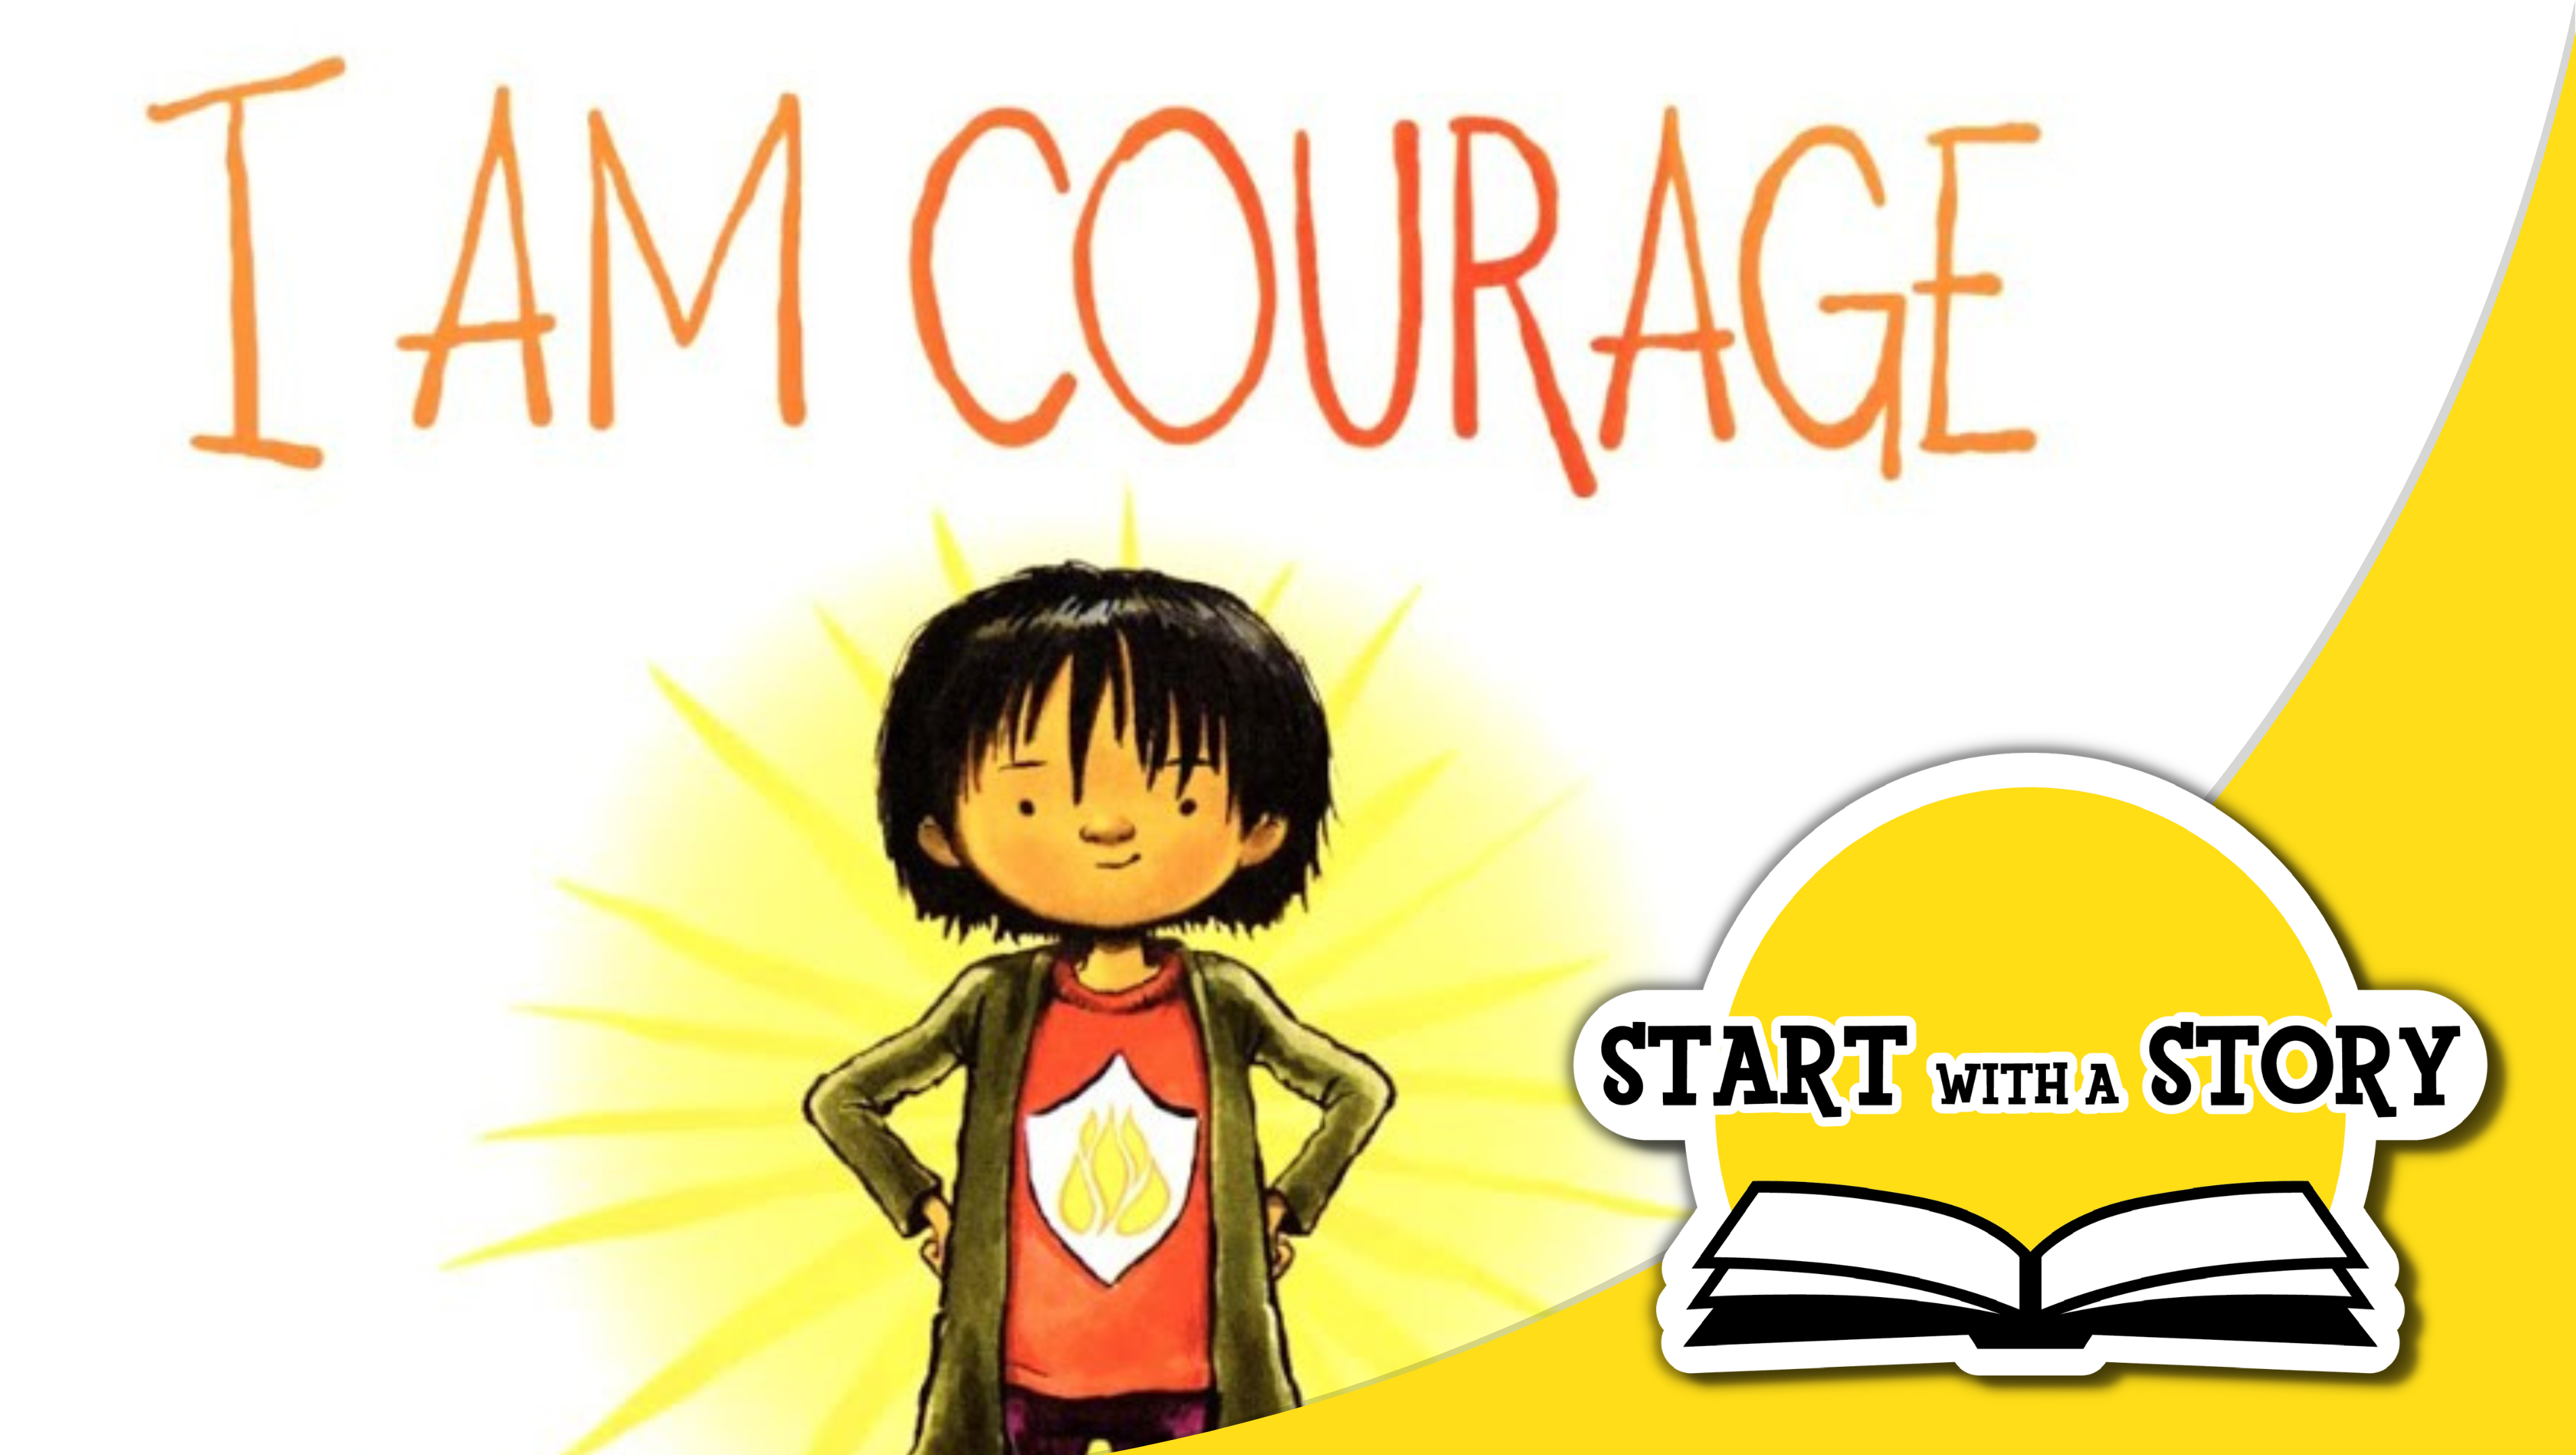 Start With a Story I Am Courage Overview